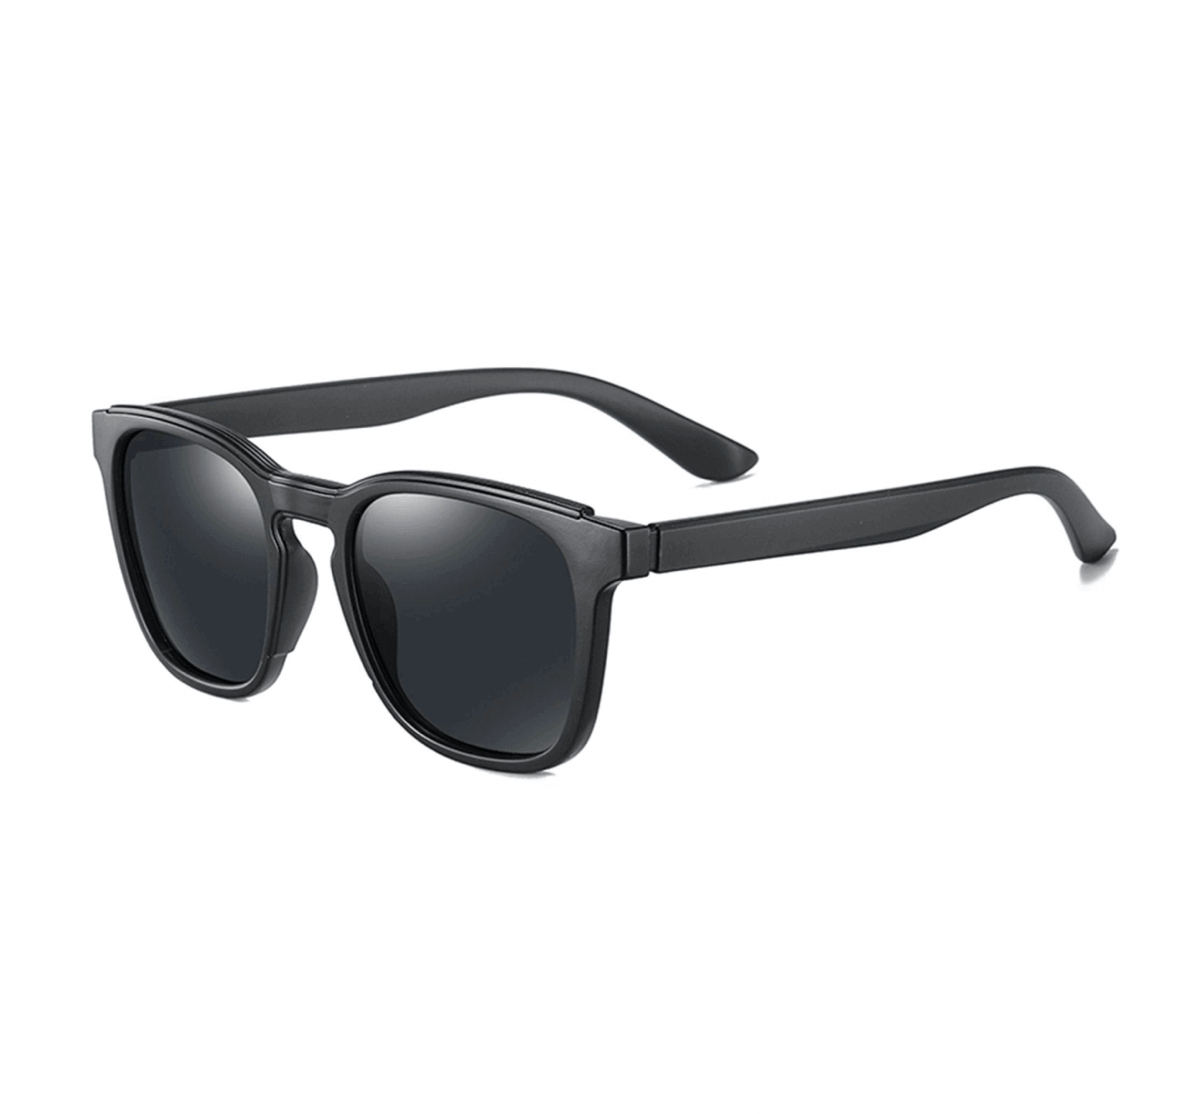 Wholesale Unisex Sunglasses from China Sunglasses Manufacturer and Supplier